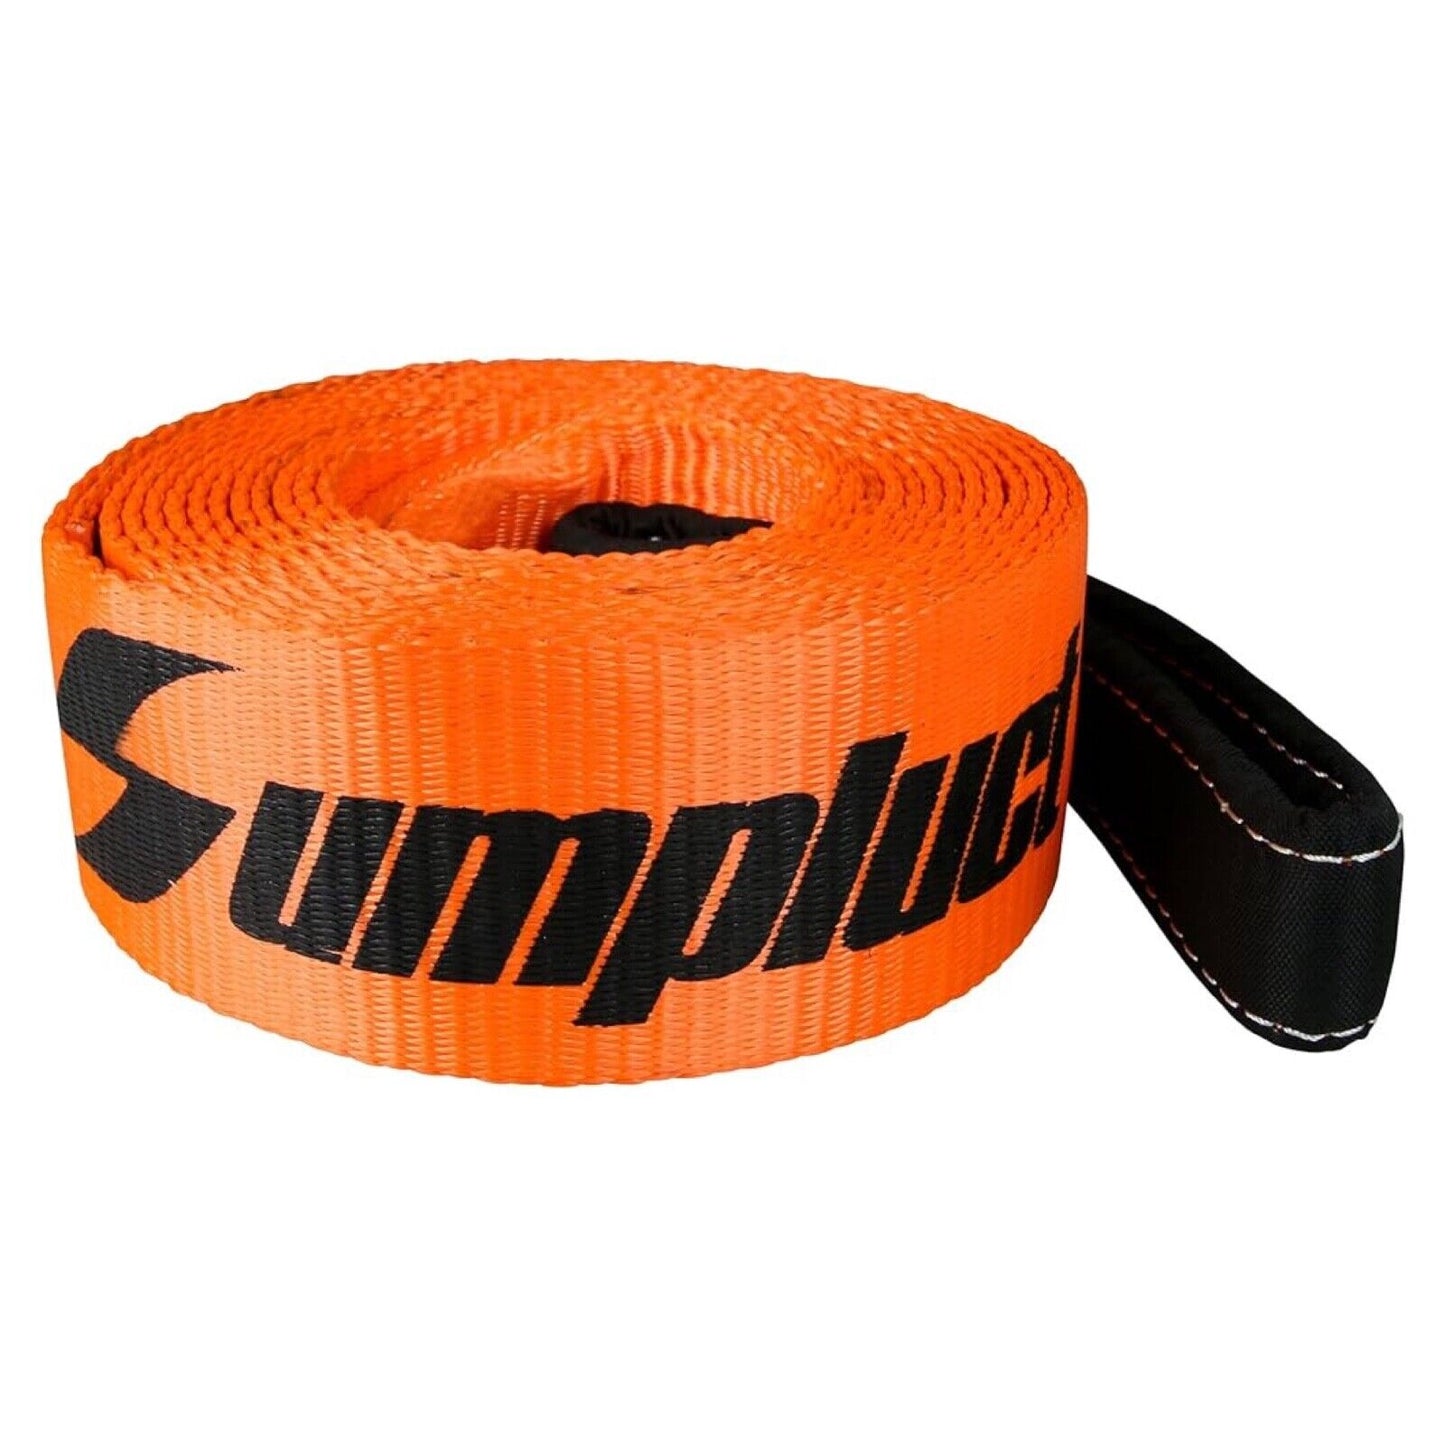 3" x 20' 30,000 lb,Heavy Duty Offroad Strap for Off Road Recovery, Towing